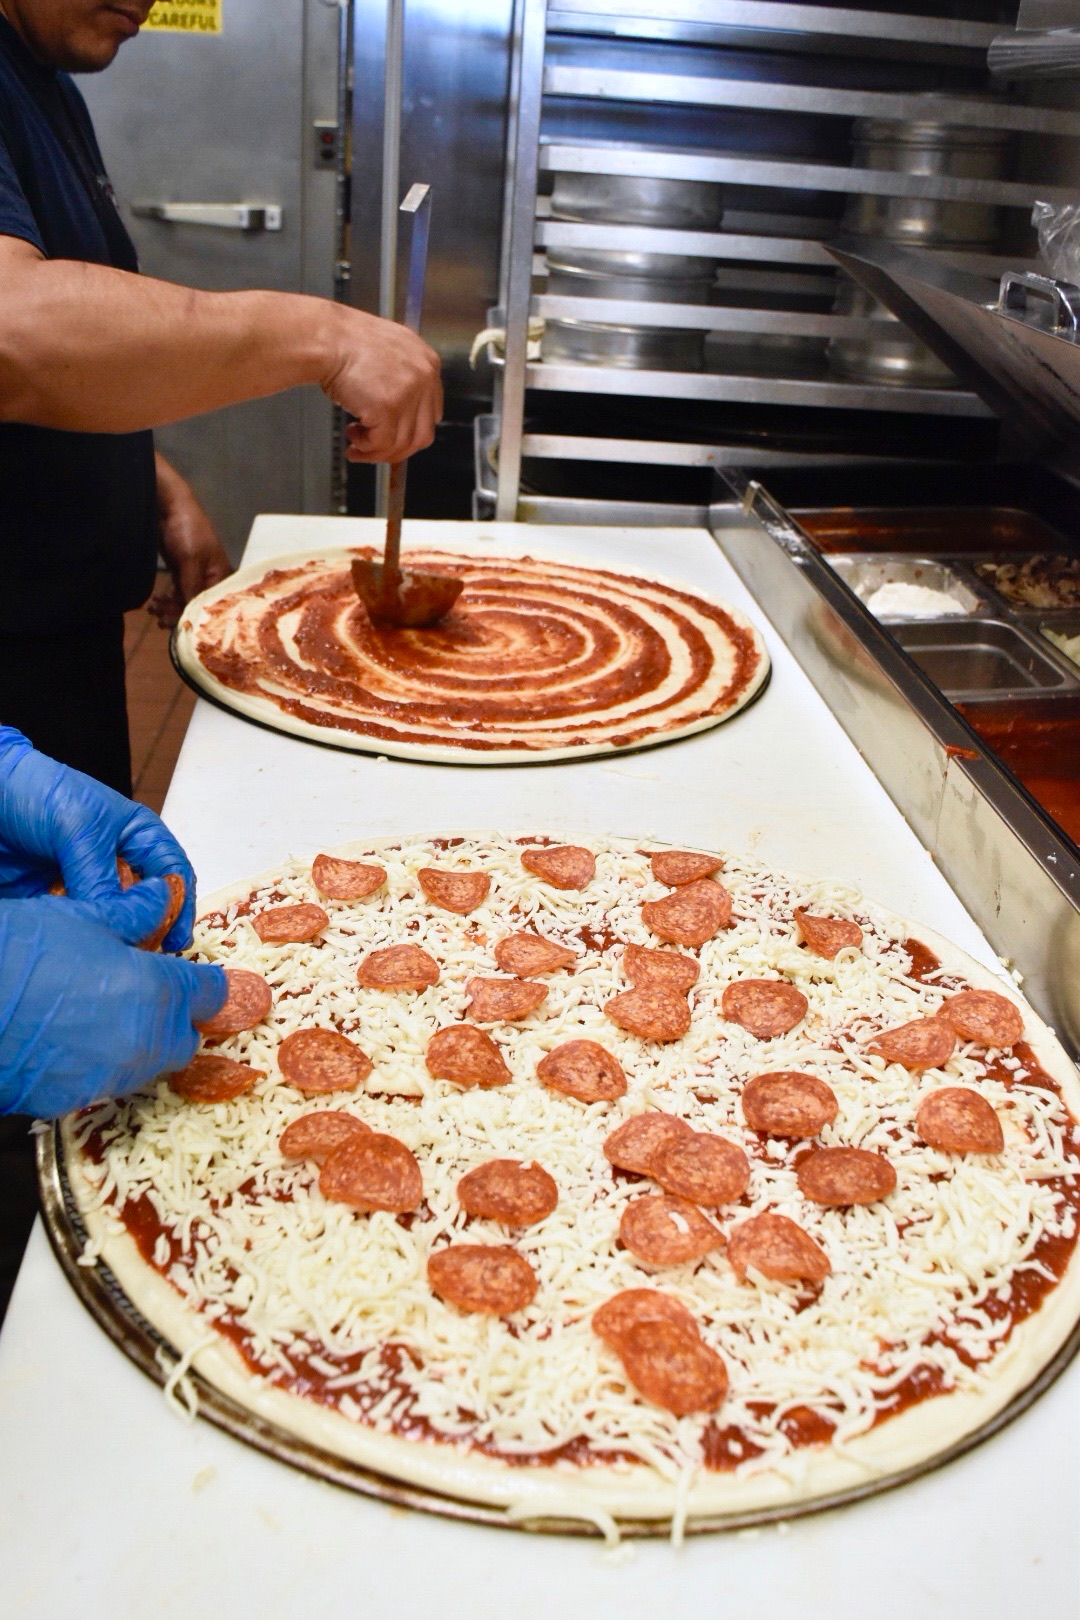 Photo of a man spreading pizza sause onto a pizza an another man placing toppings on a pizza